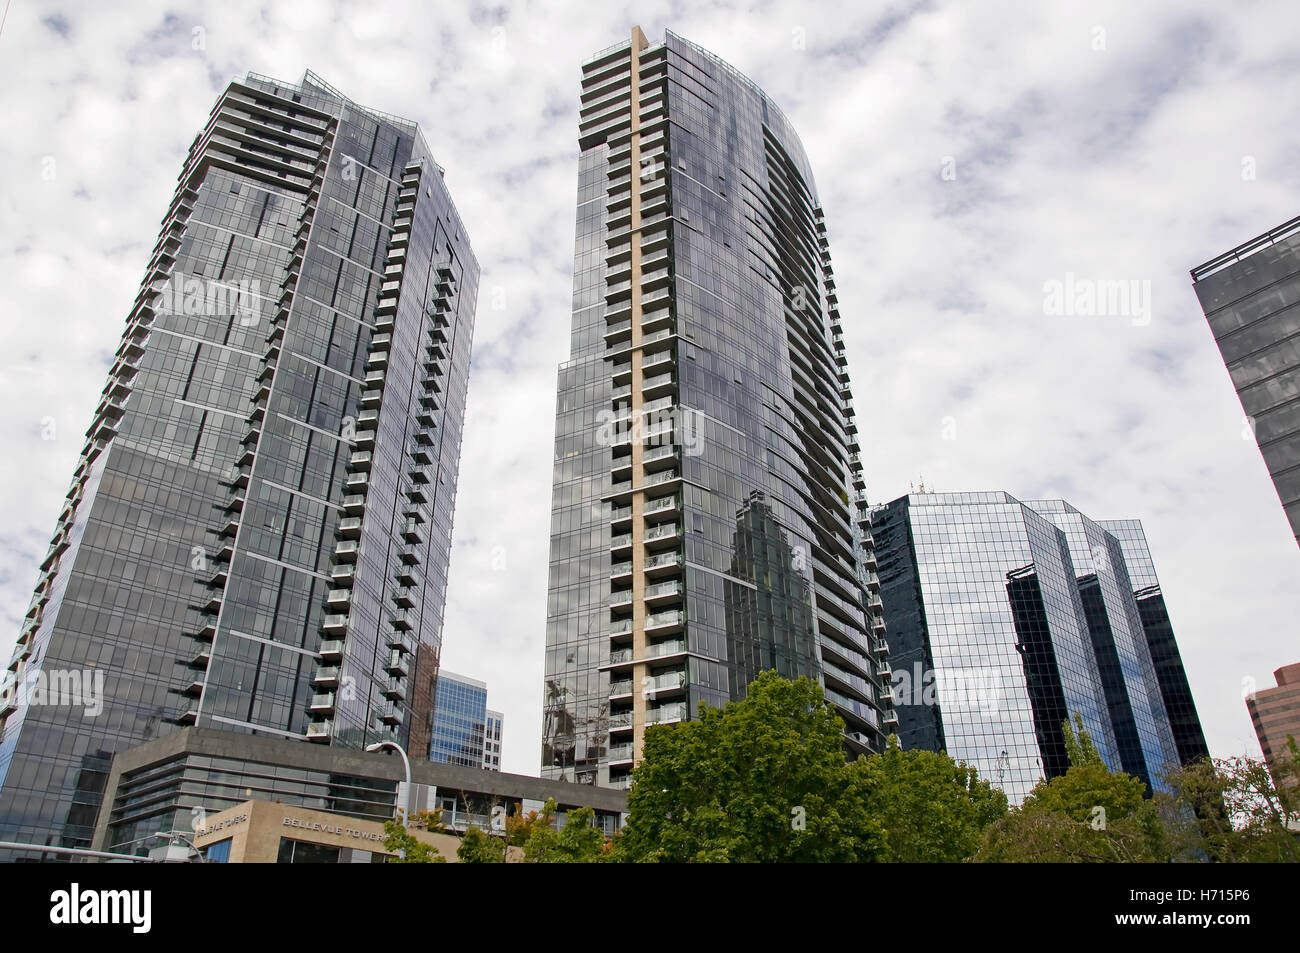 This is a couple of city skyscraper buildings on a cloudy day.  Taken in Bellevue, Washington Stock Photo